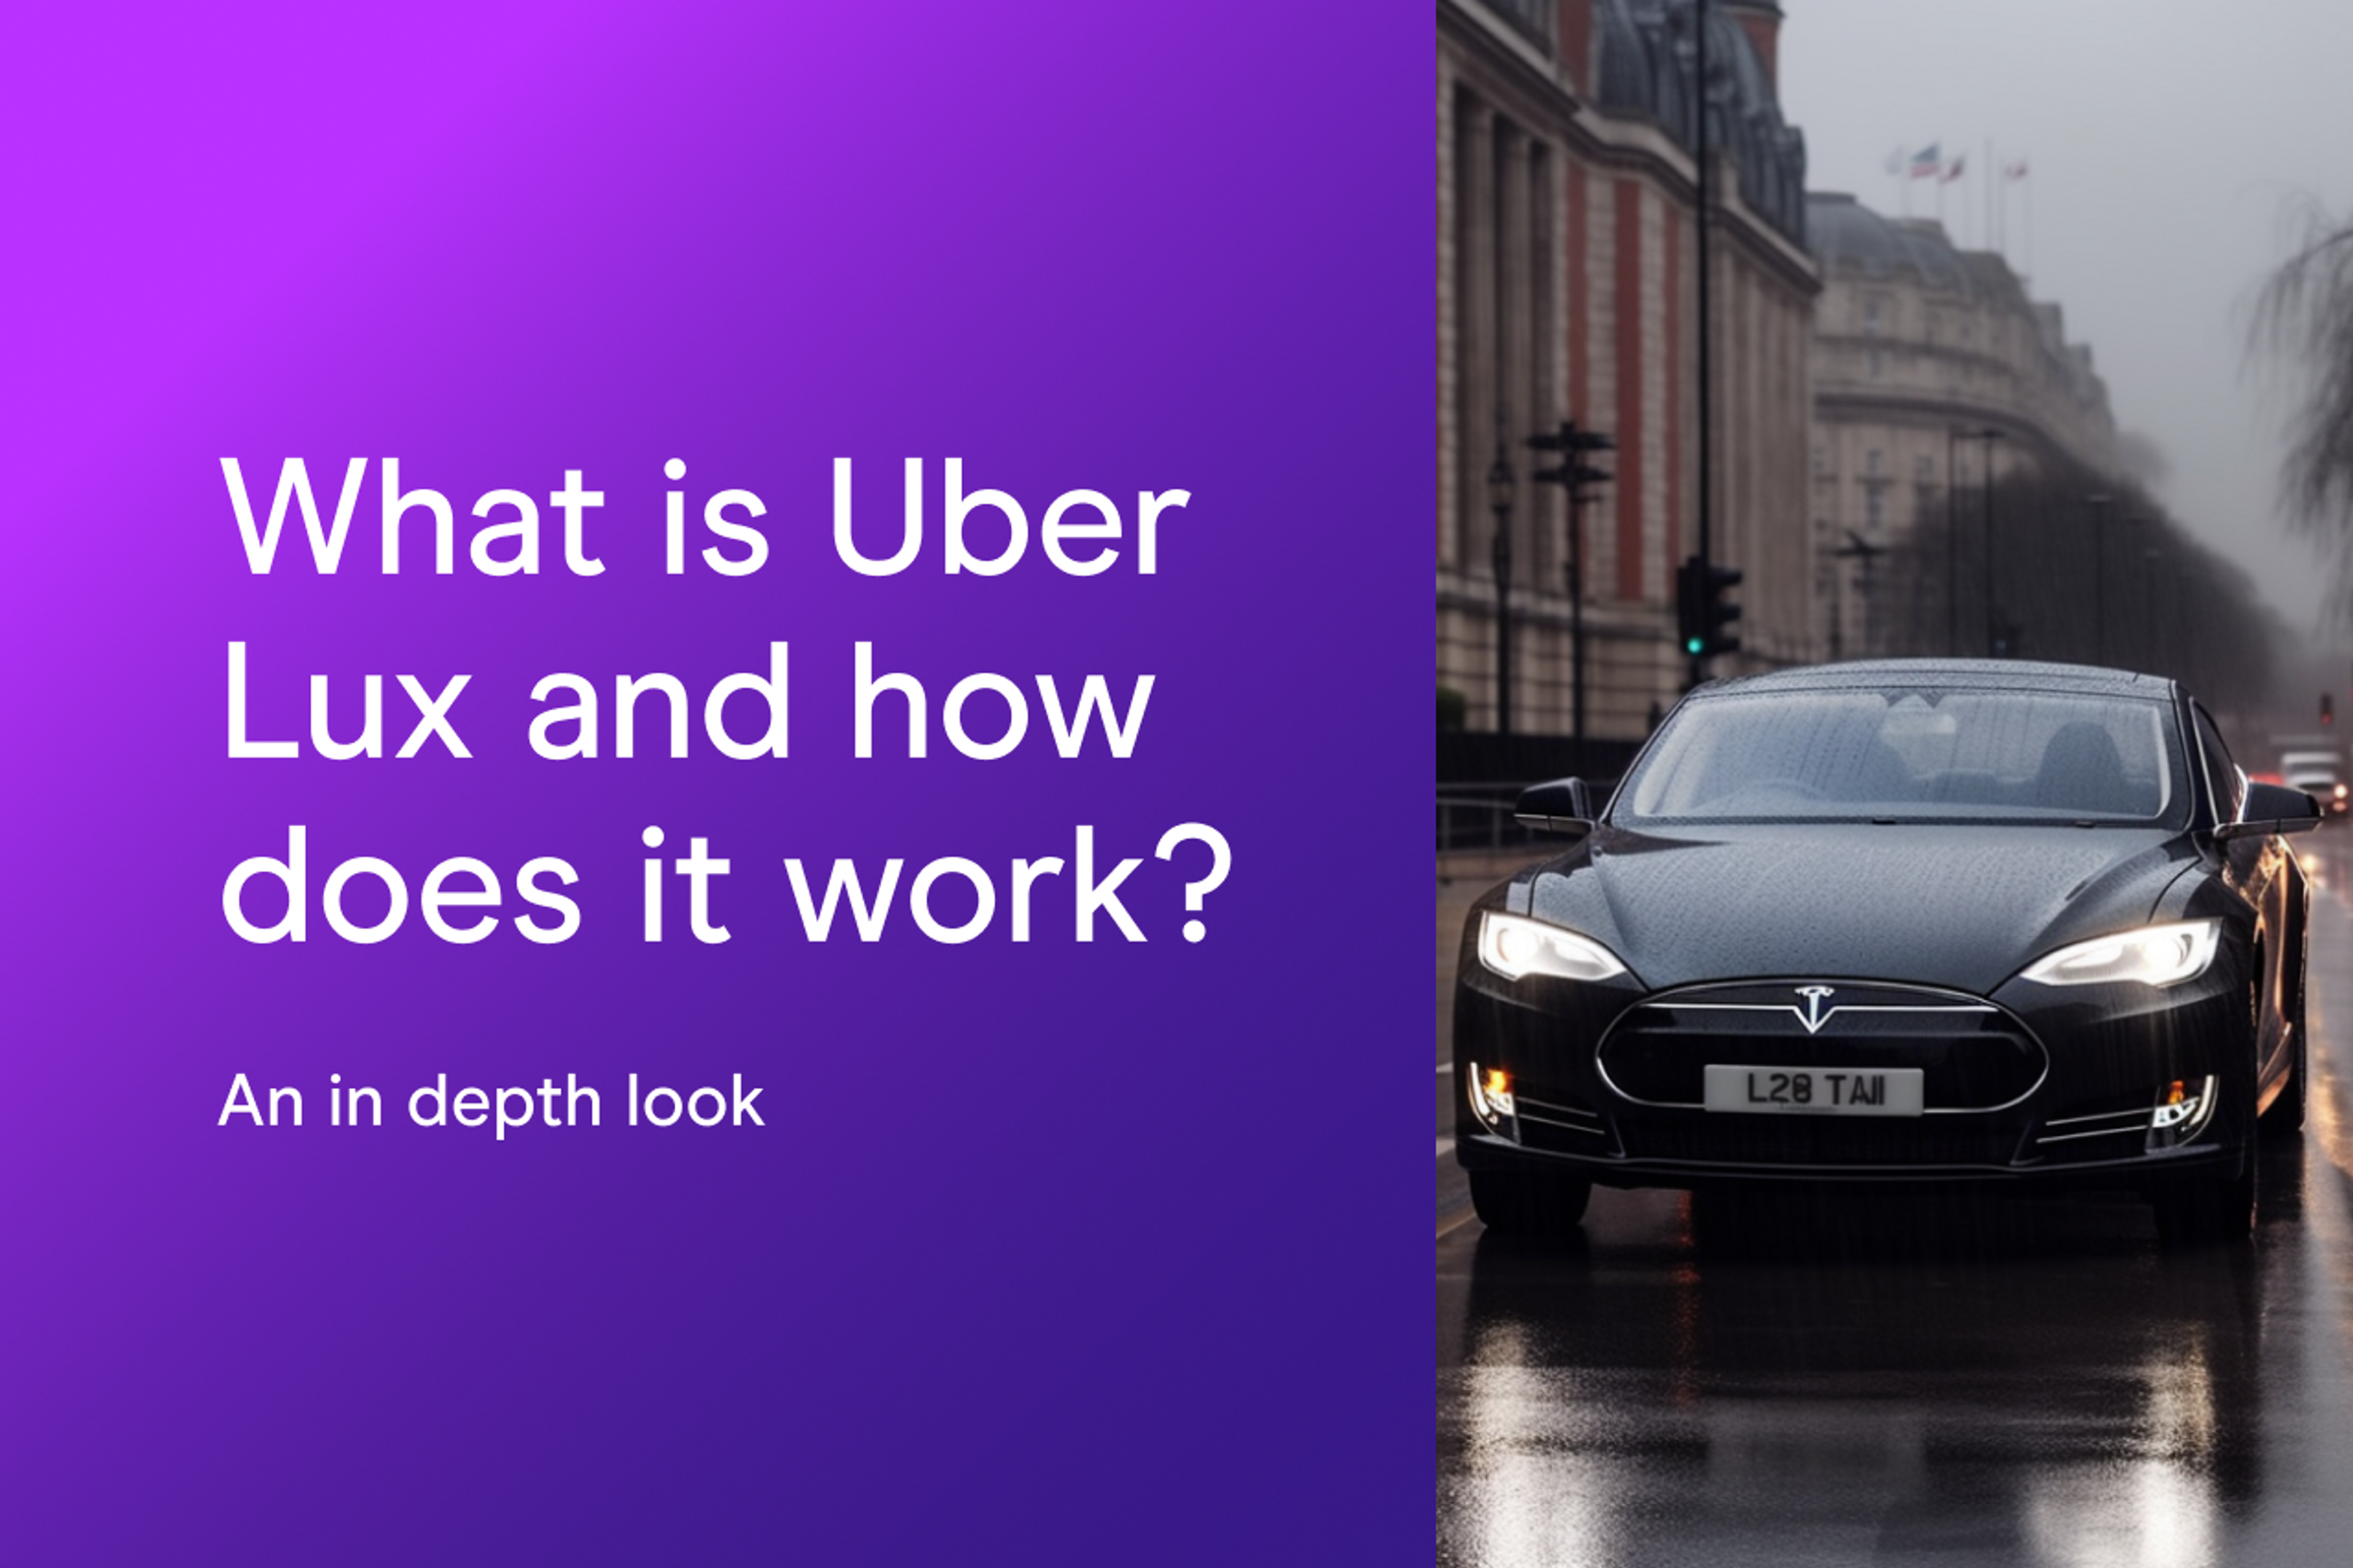 How does Uber Lux work Zego bog featured image with black car driving in London